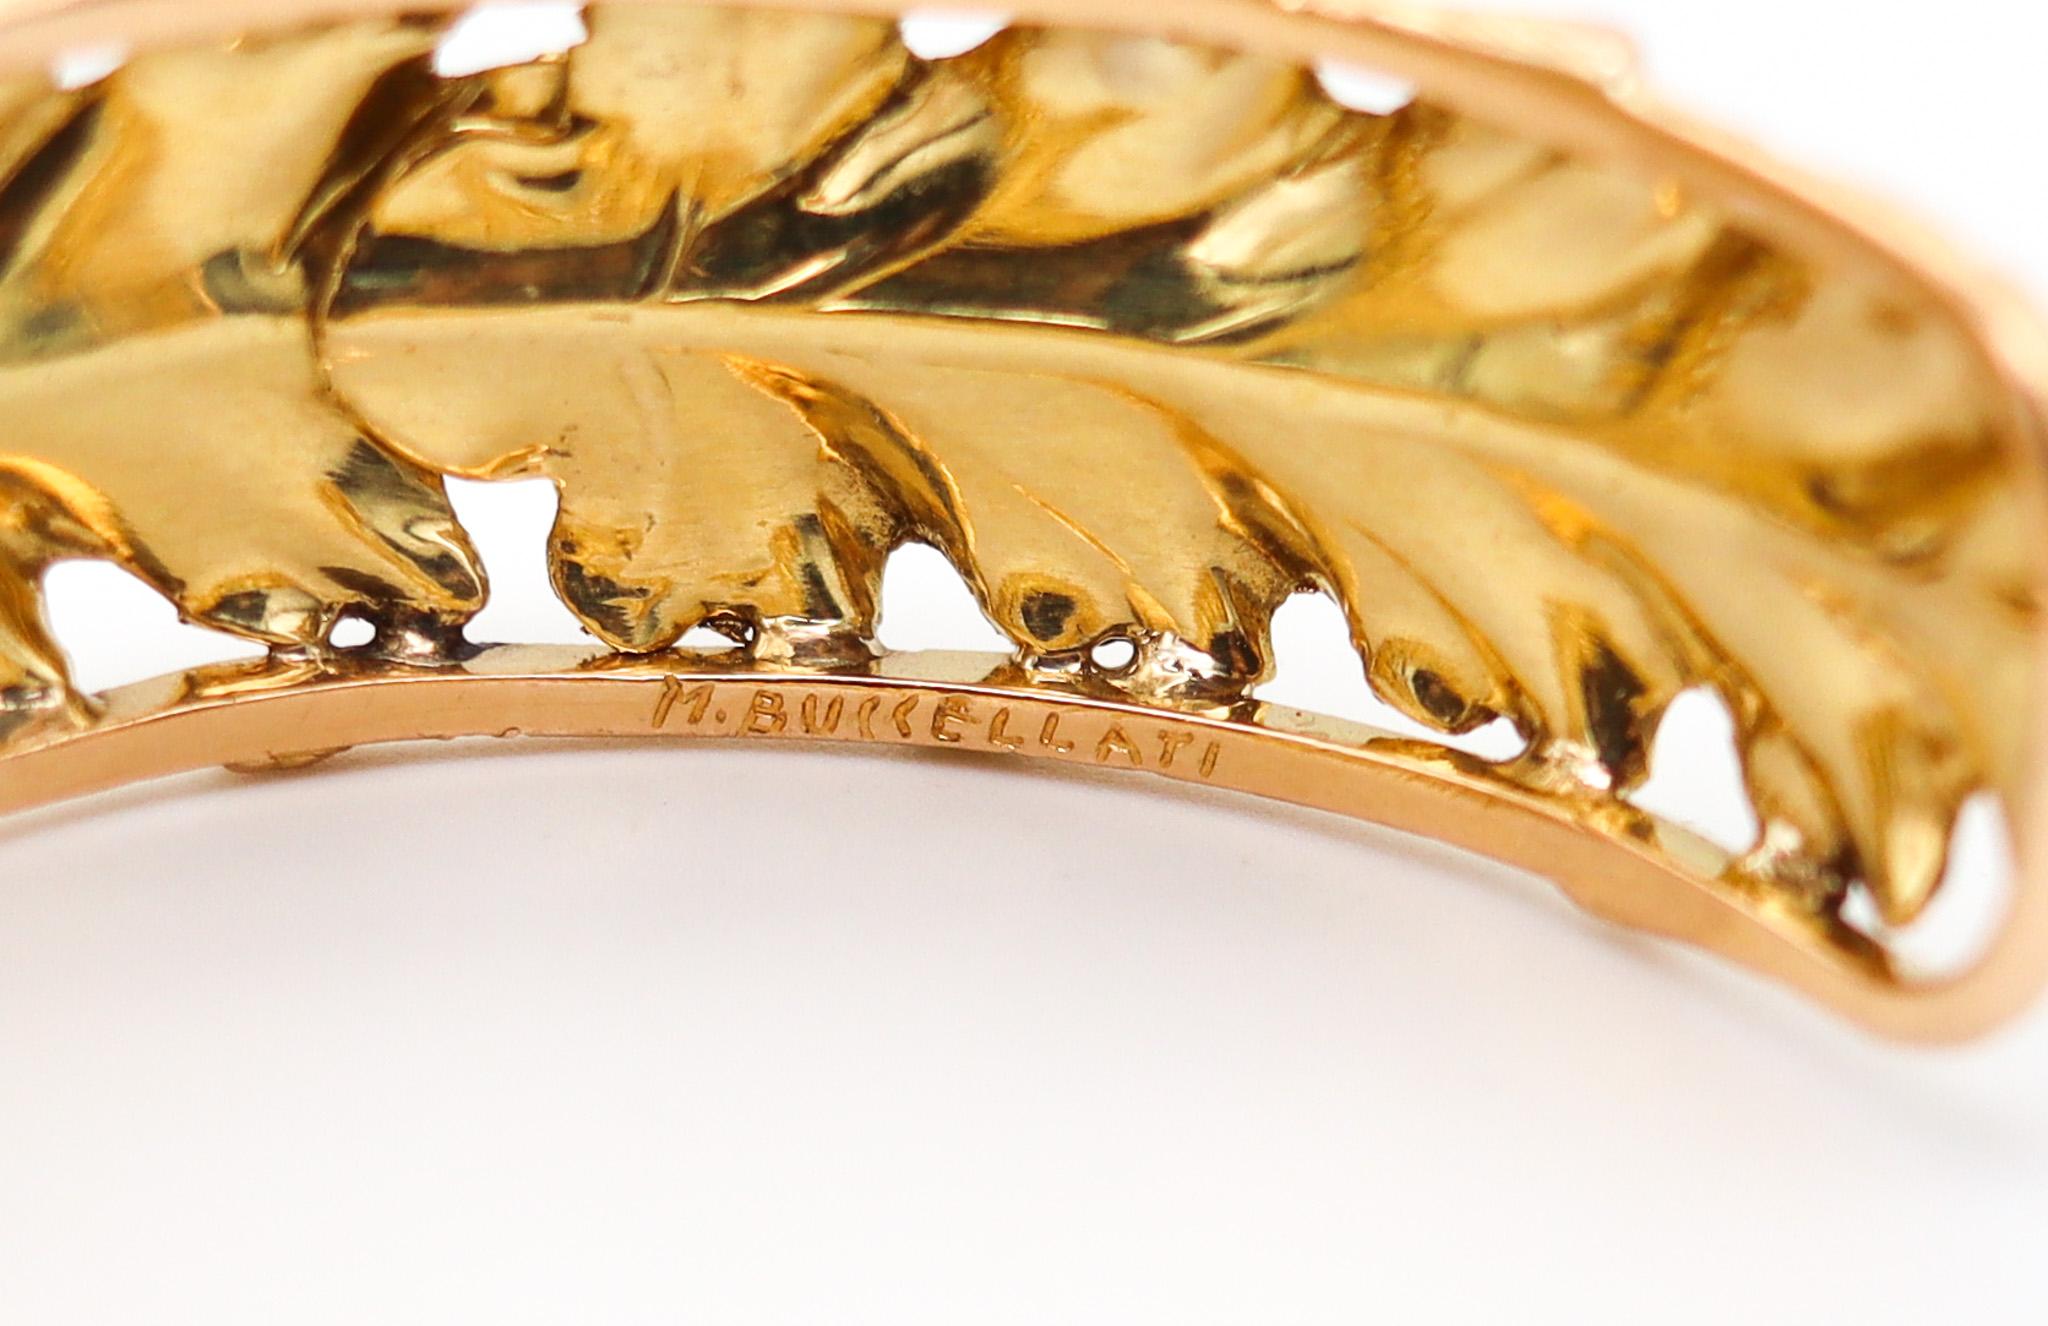 Mario Buccellati 1970 Milano Bracelet with Organic Leaves Motifs in 18k Gold In Excellent Condition For Sale In Miami, FL